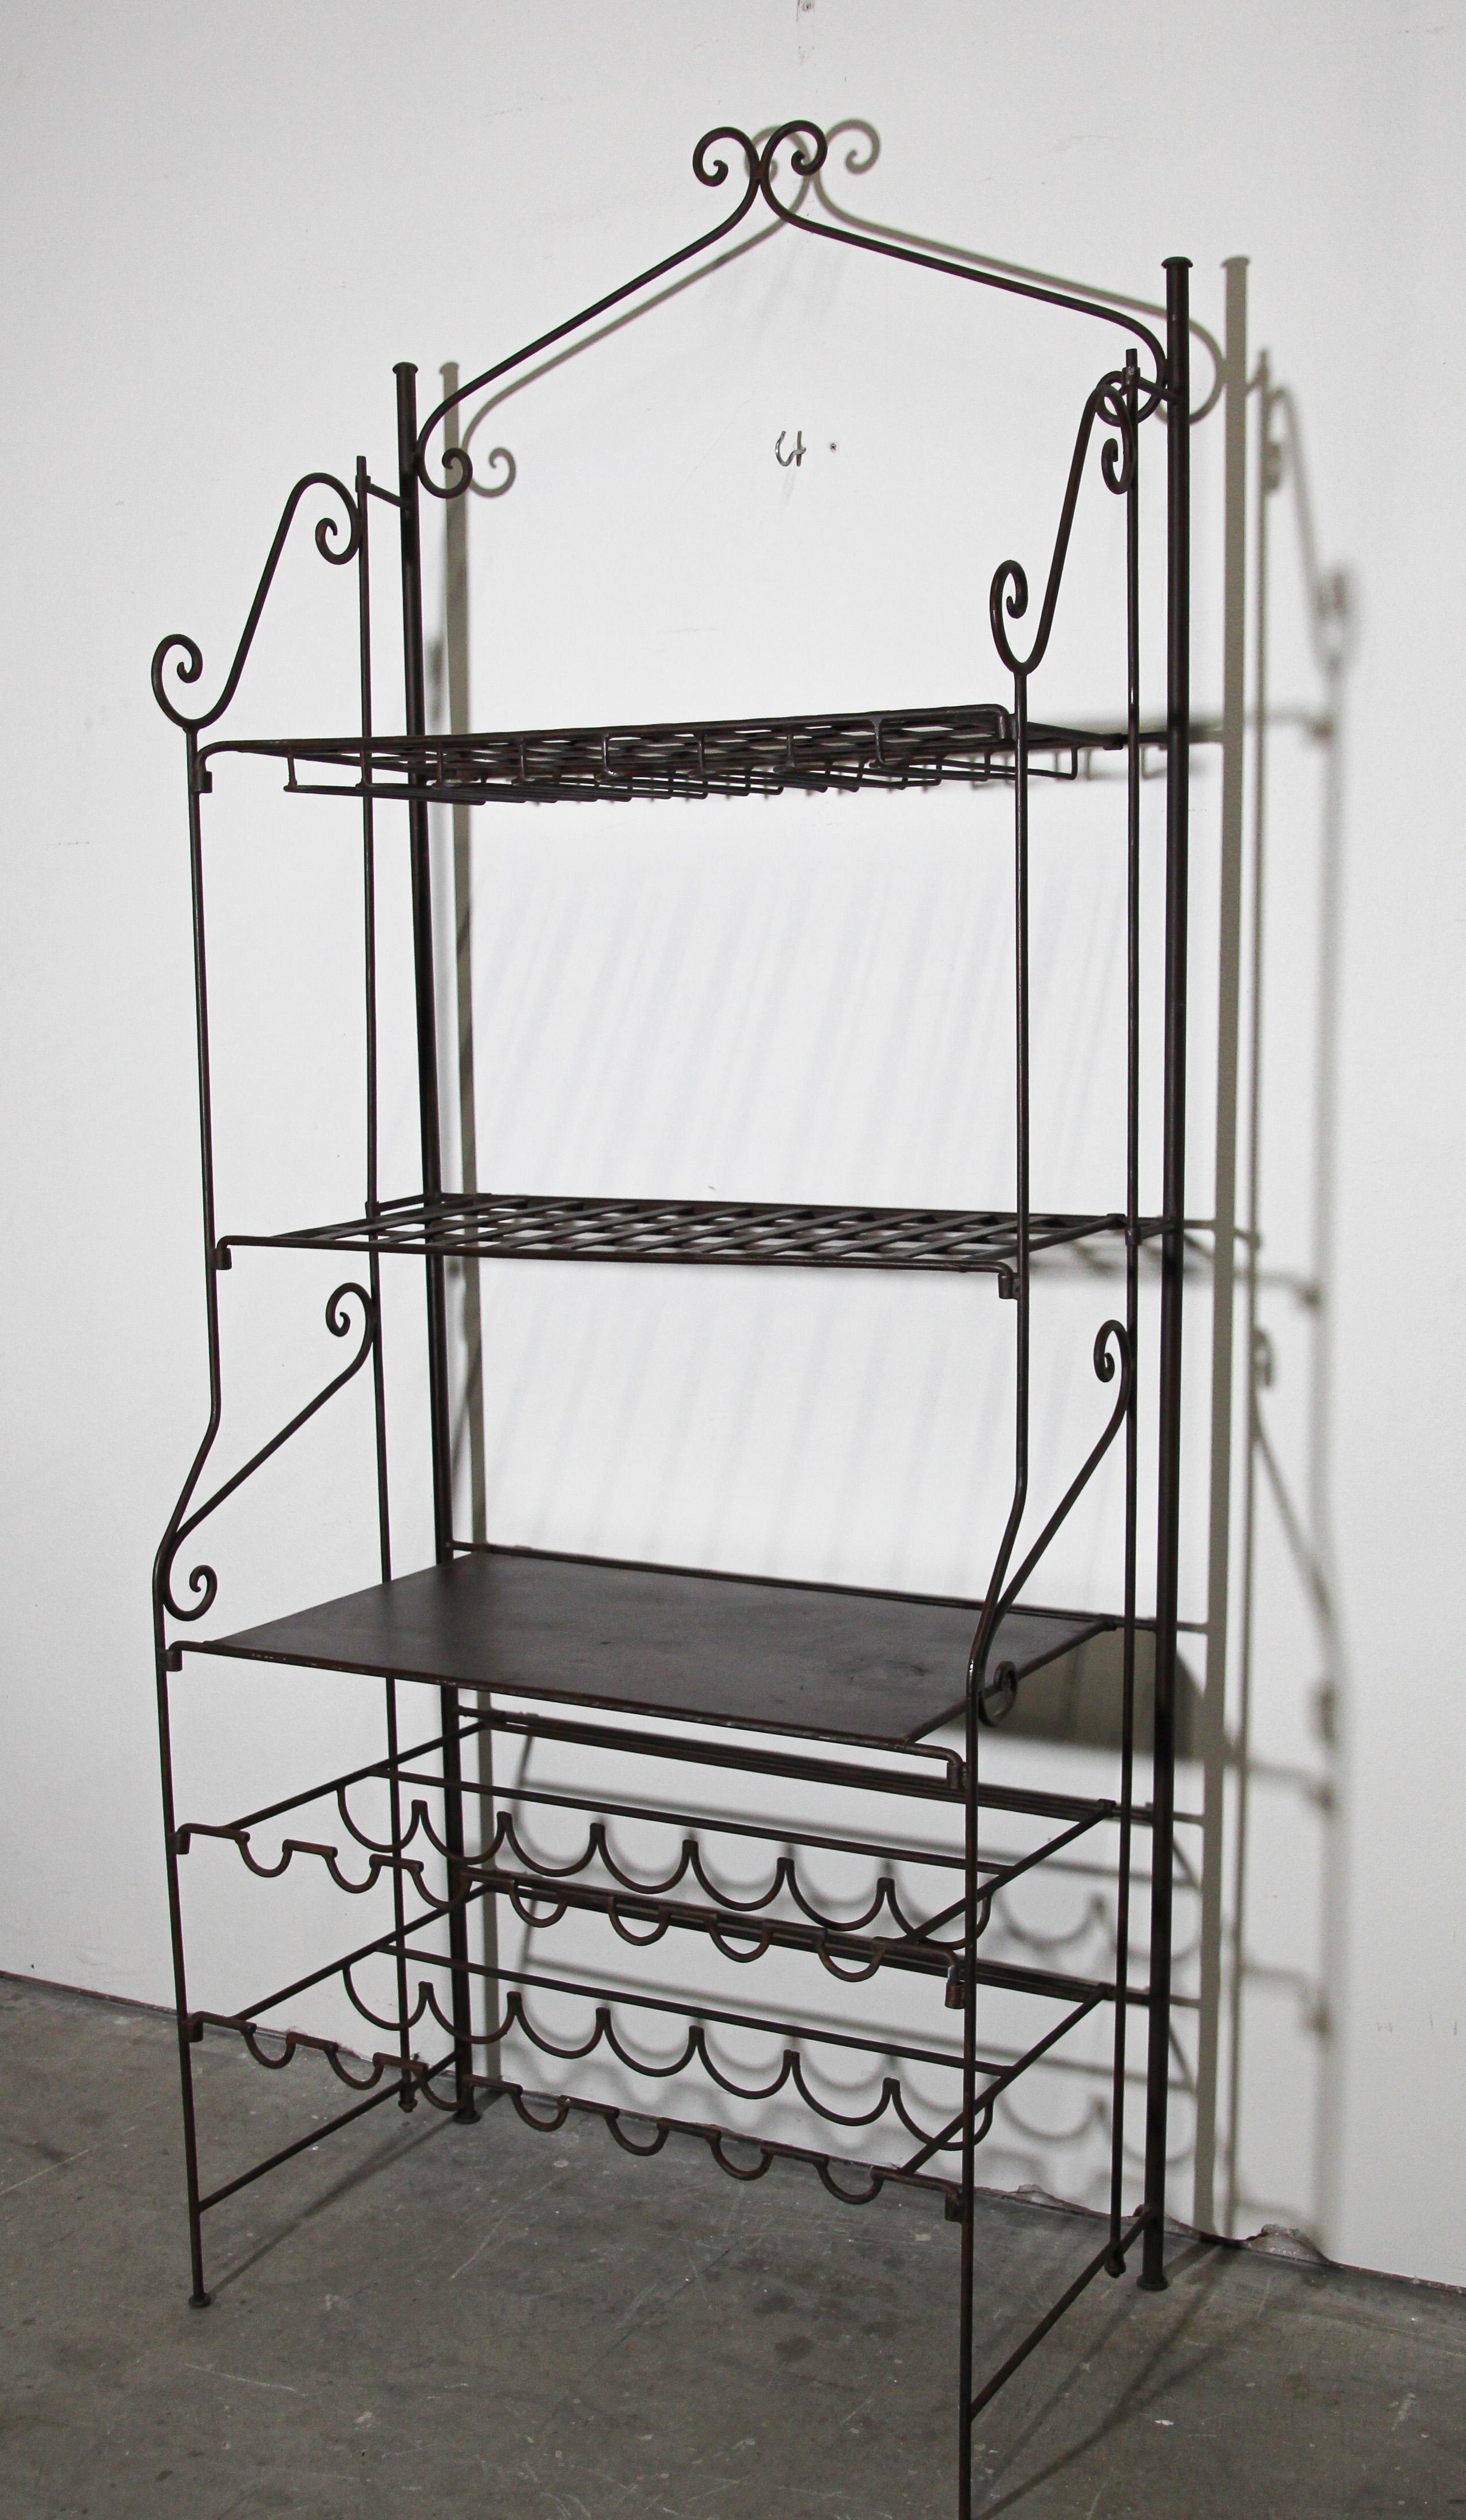 Handcrafted stylish original French wine iron bar rack with scrolled shelf supports details. 
Perfect in the kitchen or any room, indoor or outdoor.
Hand-forged wrought iron wine rack with shelving and glass holder.
Wine baker racks are used